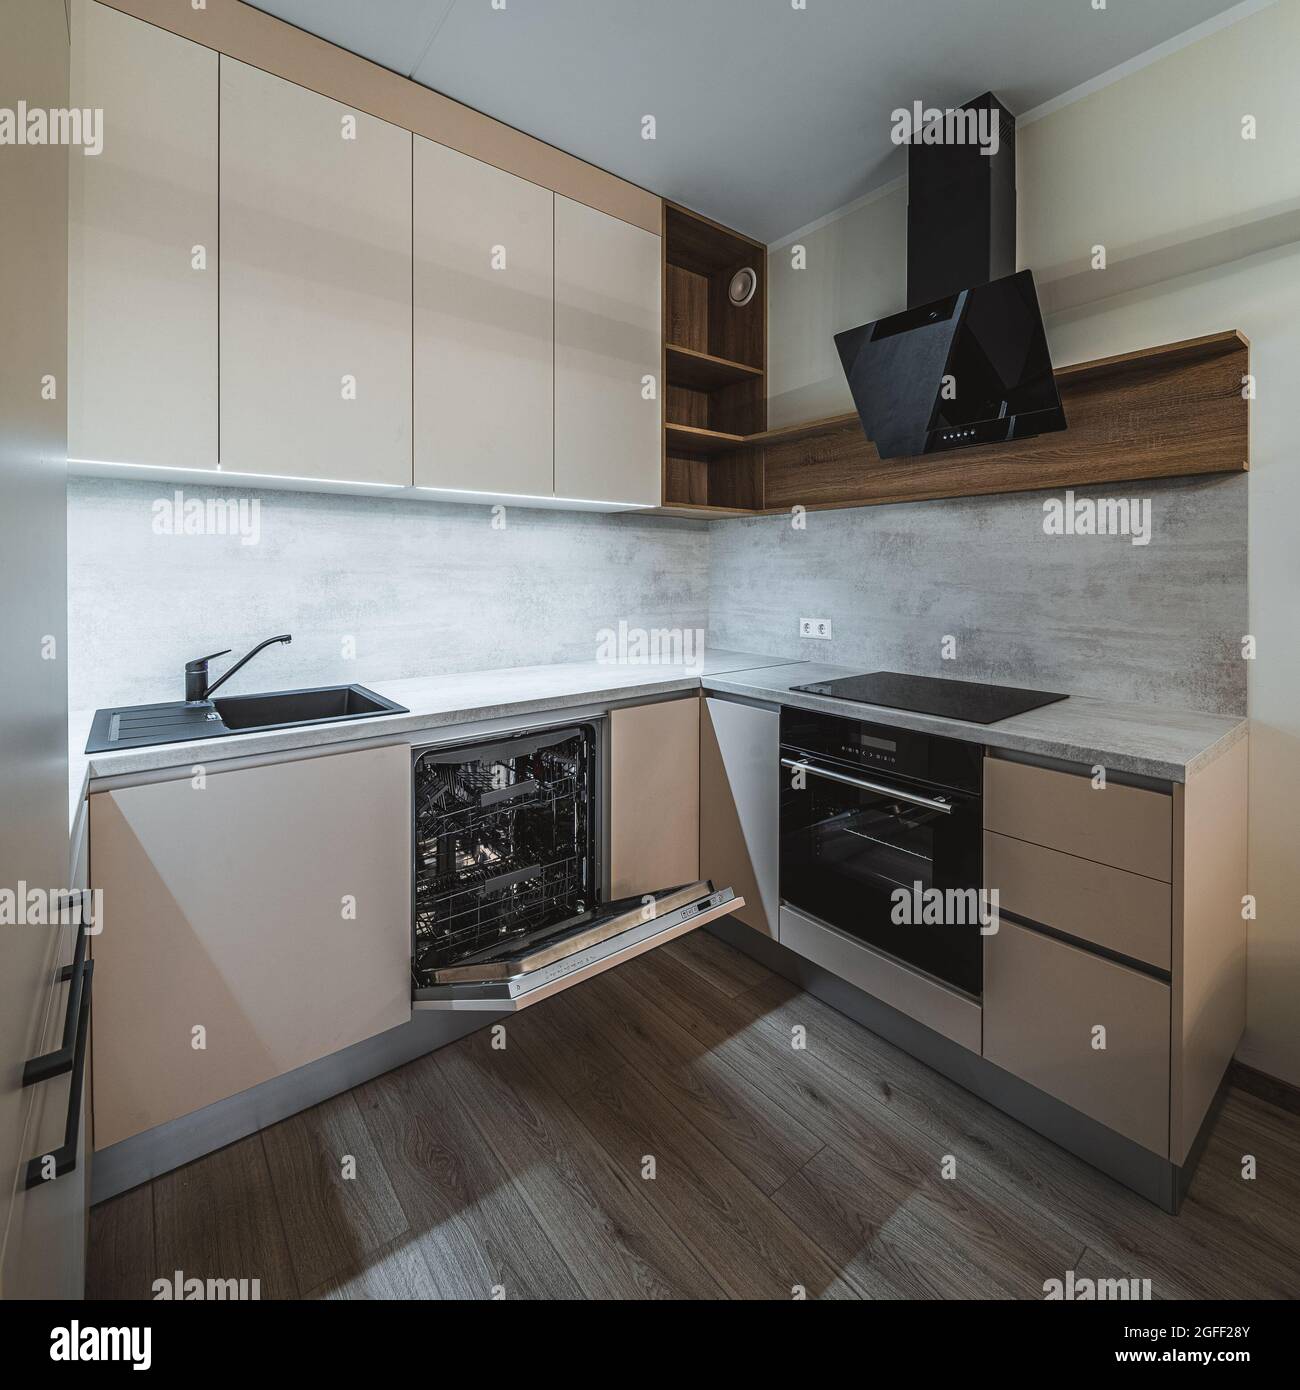 https://c8.alamy.com/comp/2GFF28Y/contemporary-interior-of-stylish-beige-kitchen-in-new-apartment-oven-and-sink-empty-wooden-shelves-black-fan-2GFF28Y.jpg